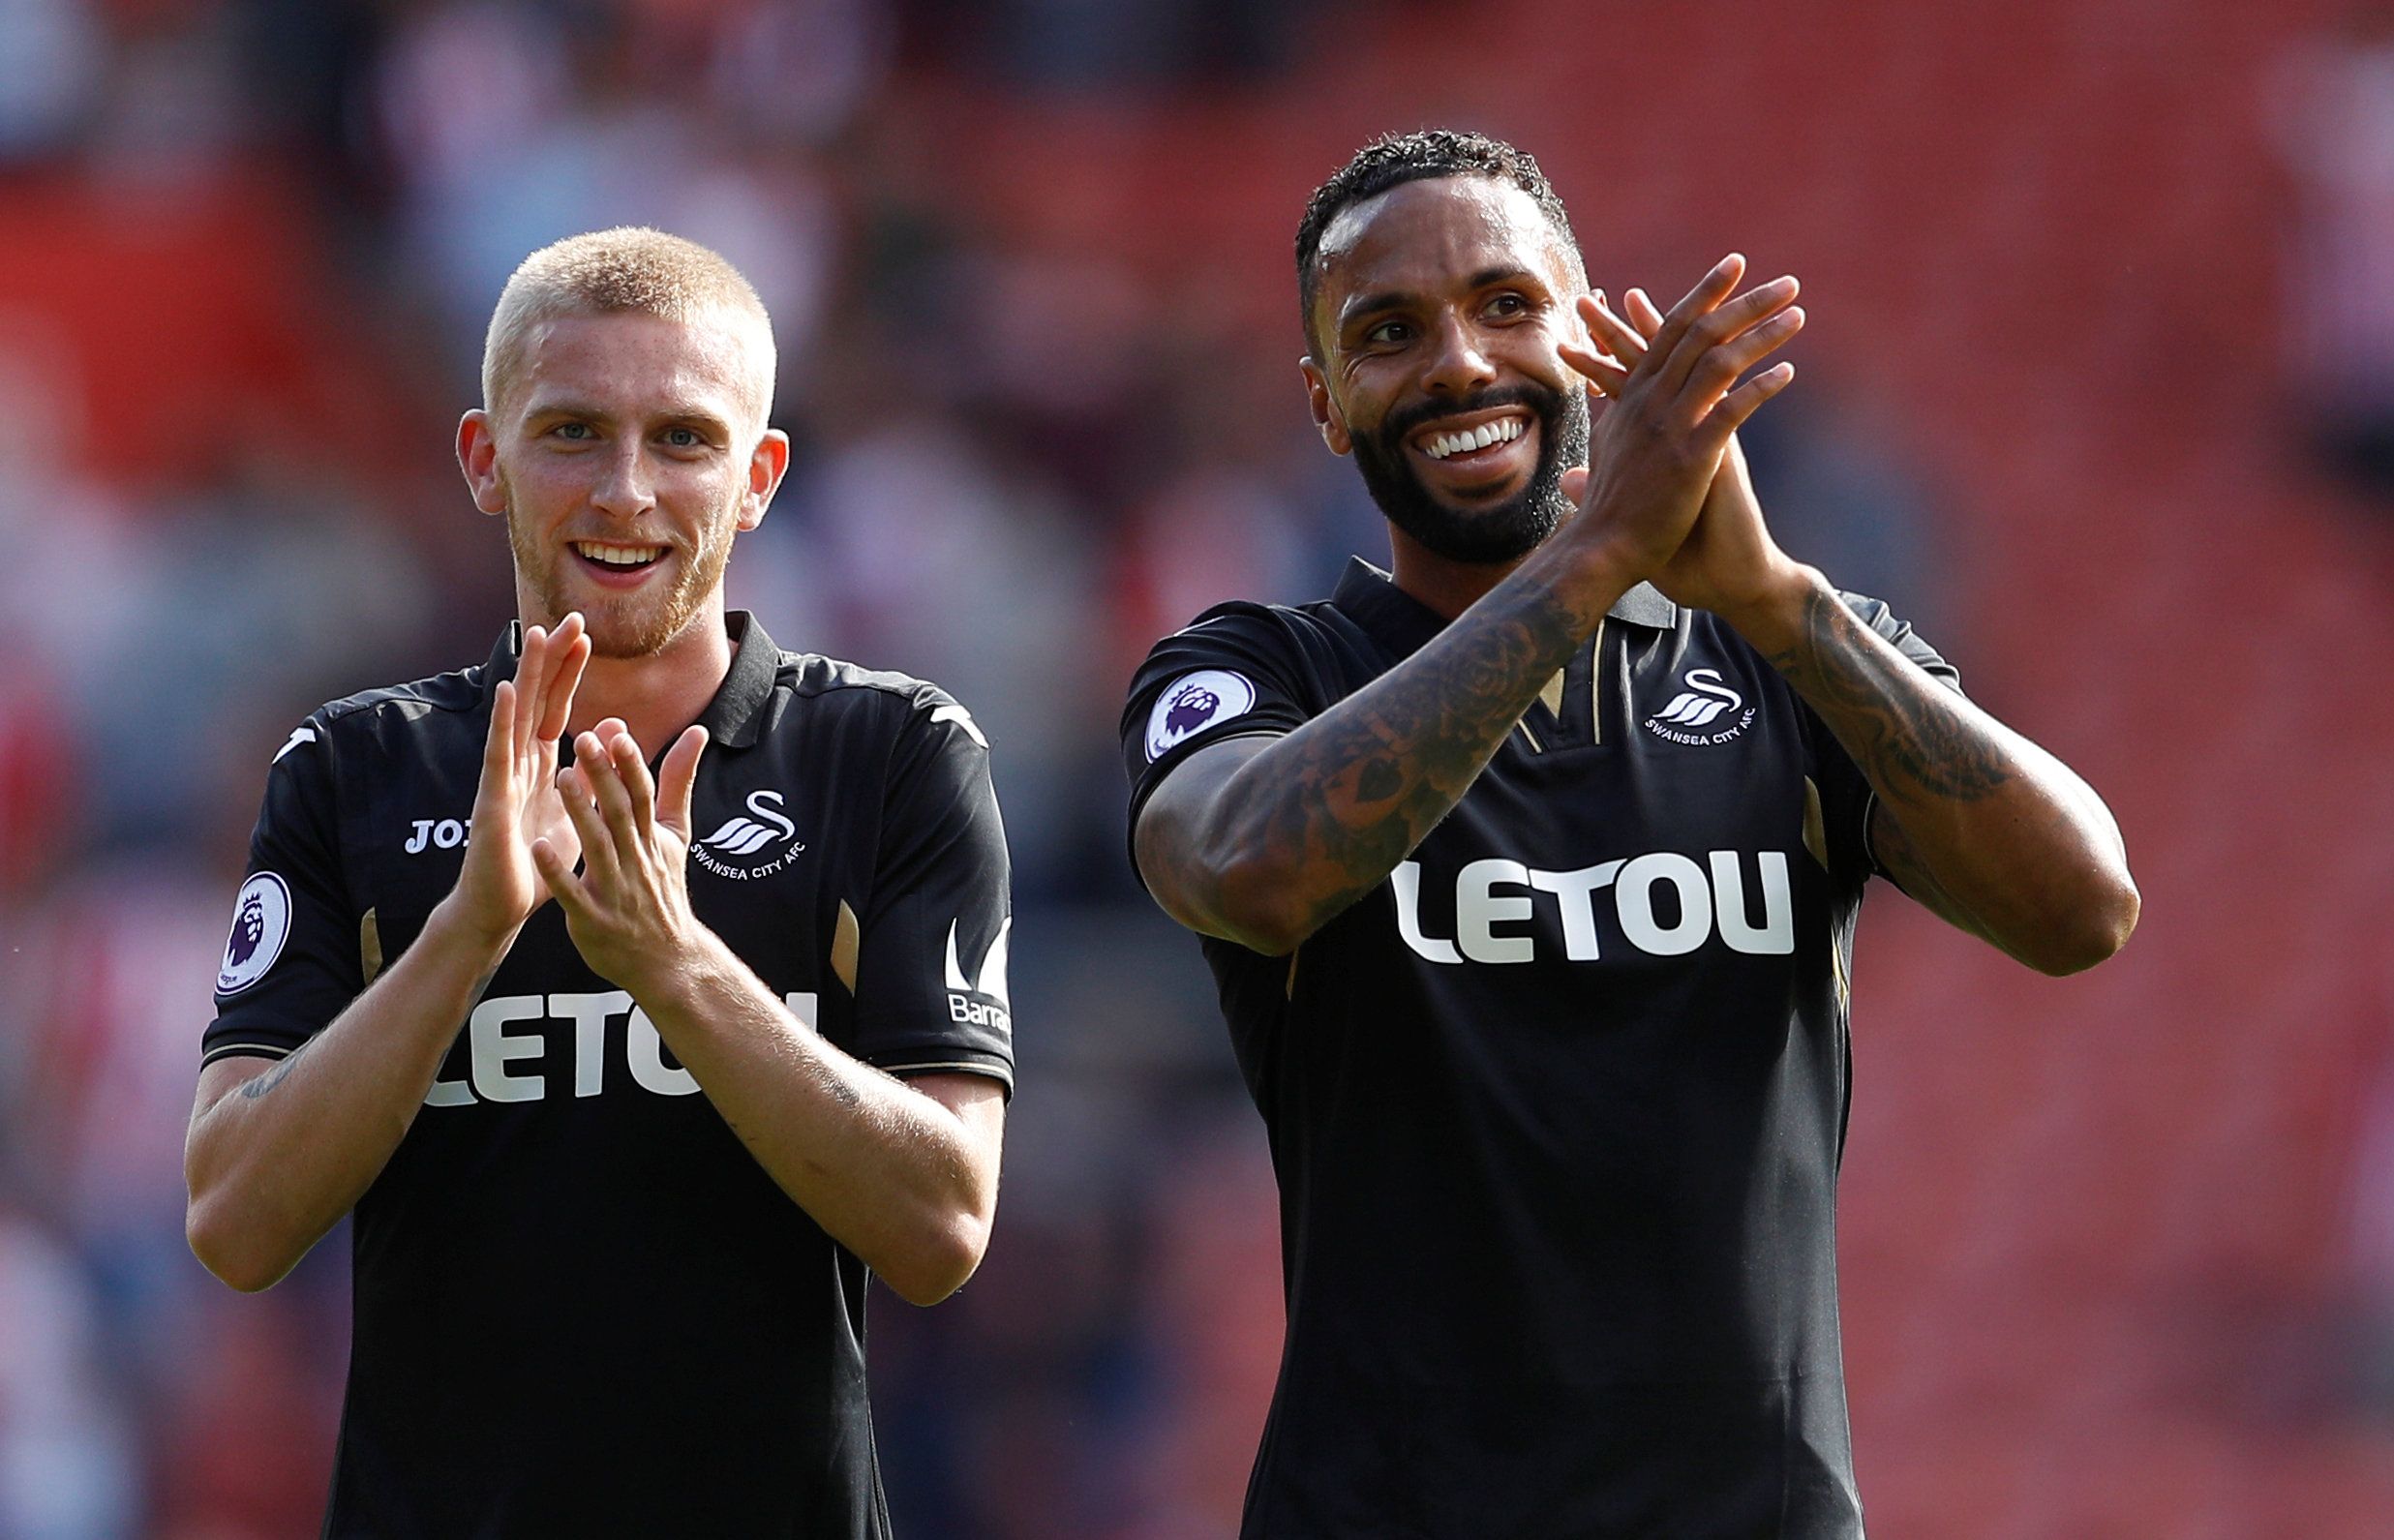 Football Soccer - Premier League - Southampton vs Swansea City - Southampton, Britain - August 12, 2017   Swansea City's Oliver McBurnie and Kyle Bartley applaud fan after the match   REUTERS/Peter Nicholls  EDITORIAL USE ONLY. No use with unauthorized audio, video, data, fixture lists, club/league logos or 